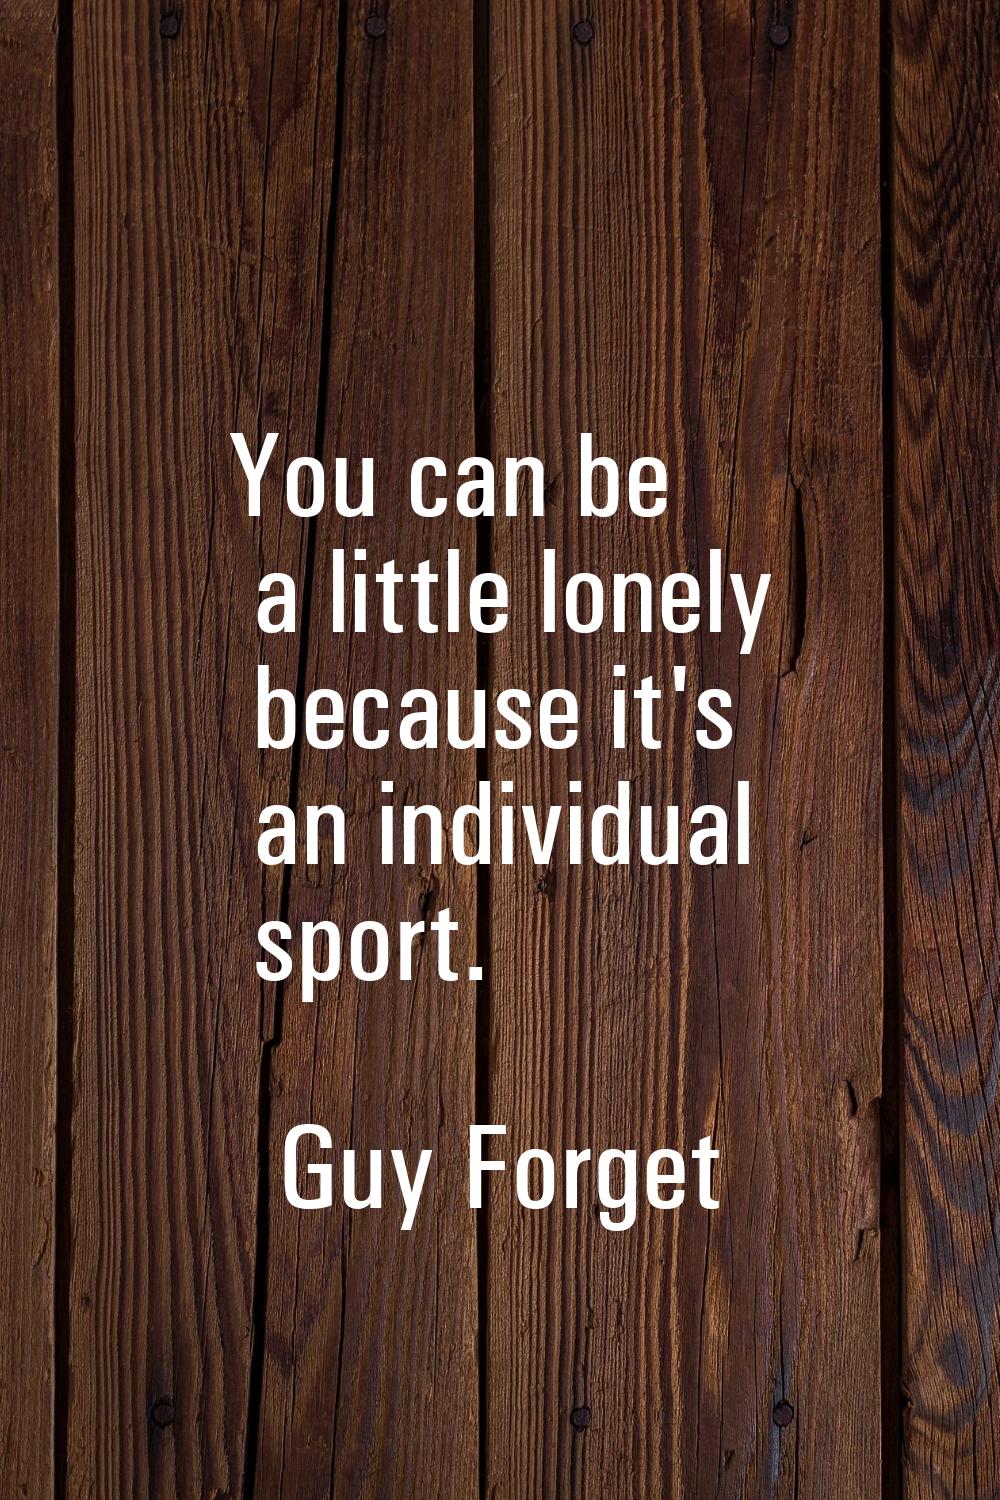 You can be a little lonely because it's an individual sport.